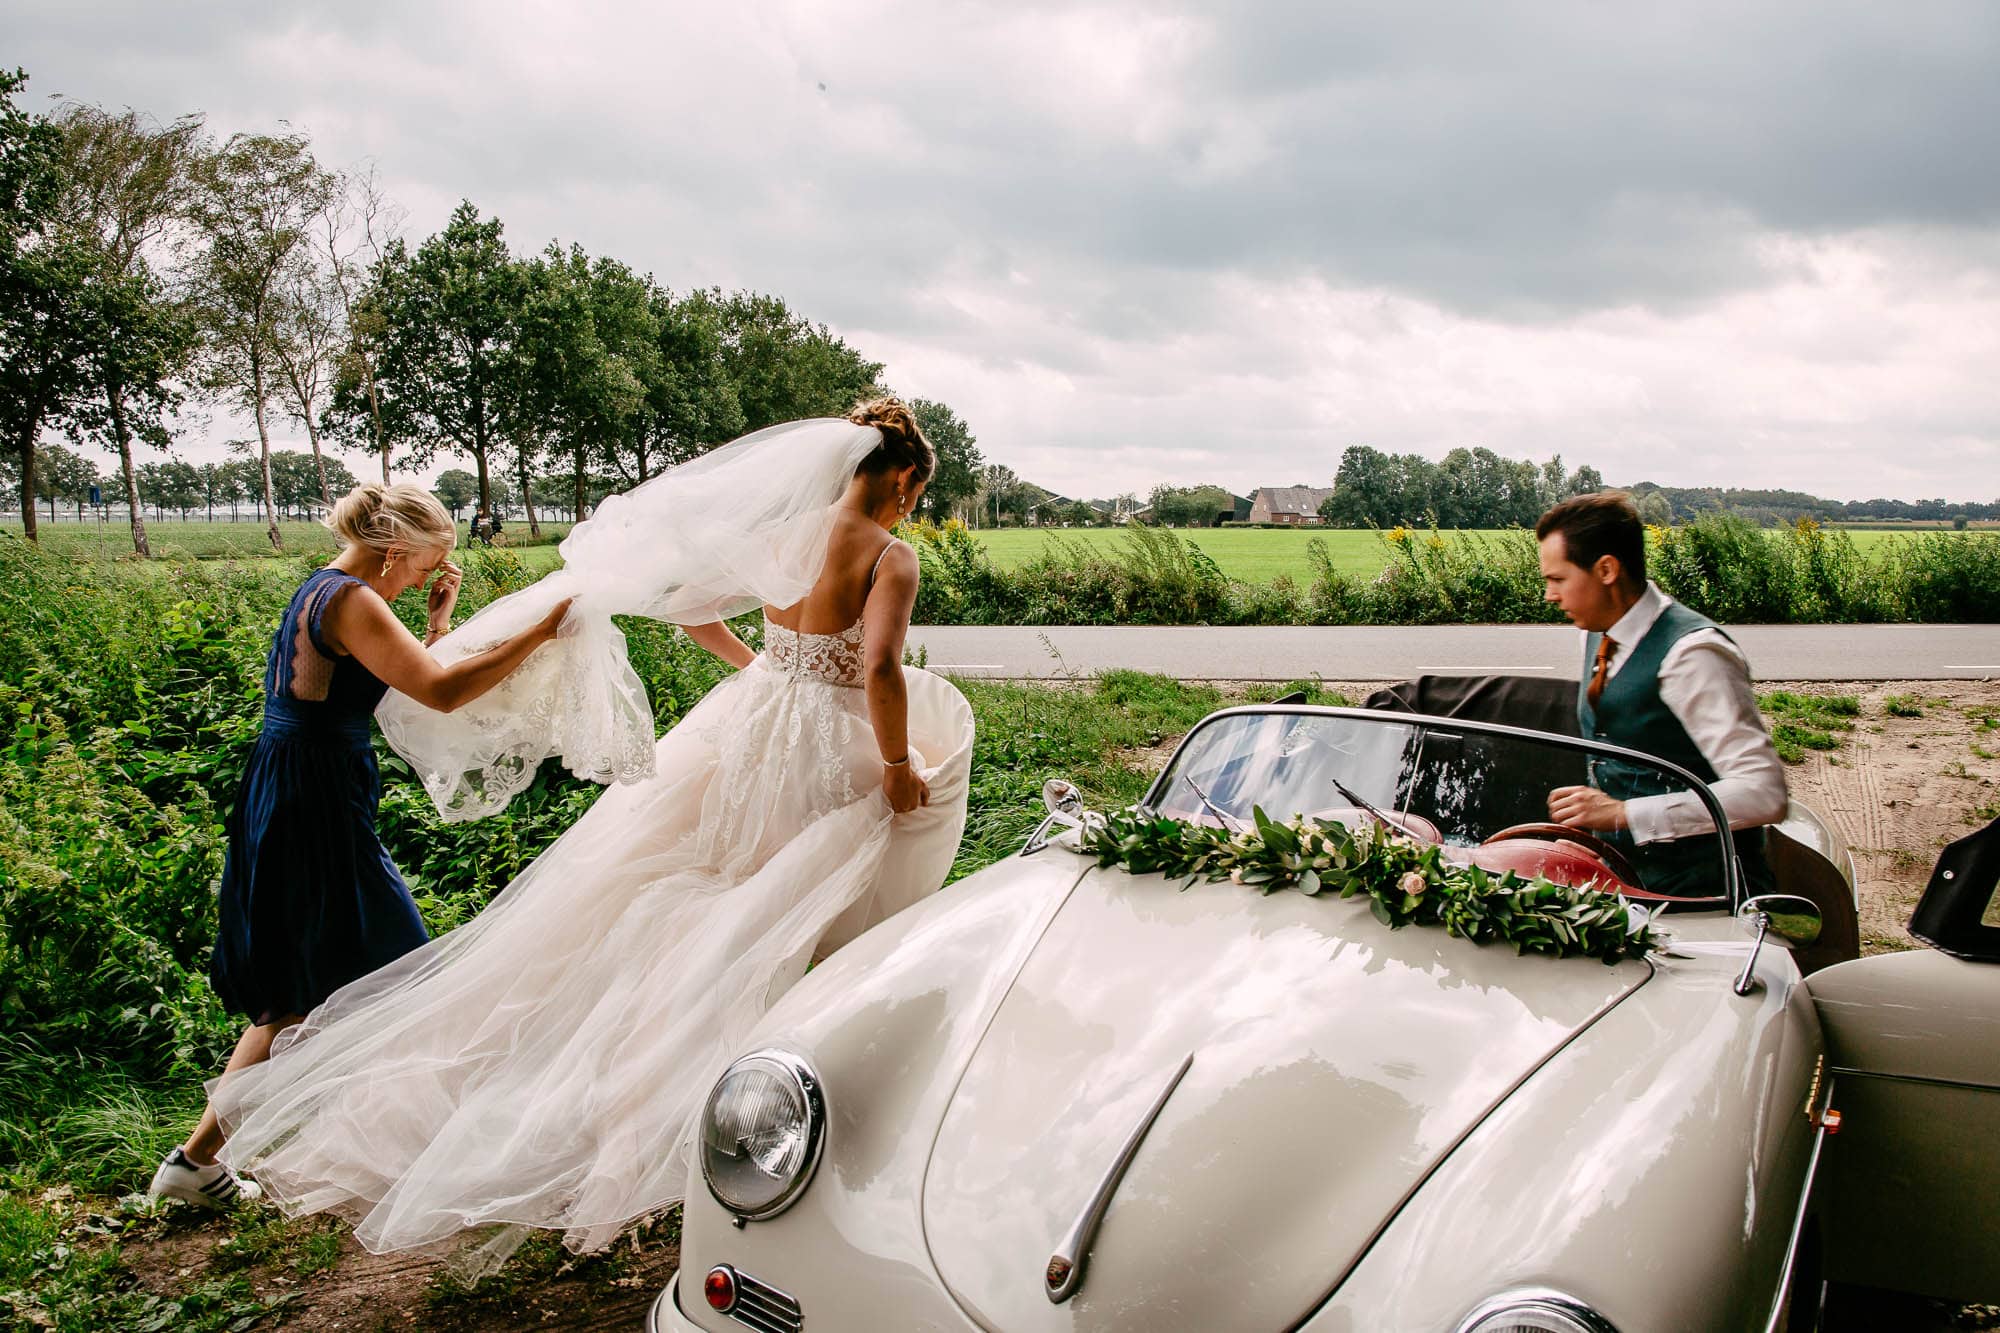 A bride and groom get ready in a vintage car with help from their master of ceremonies.